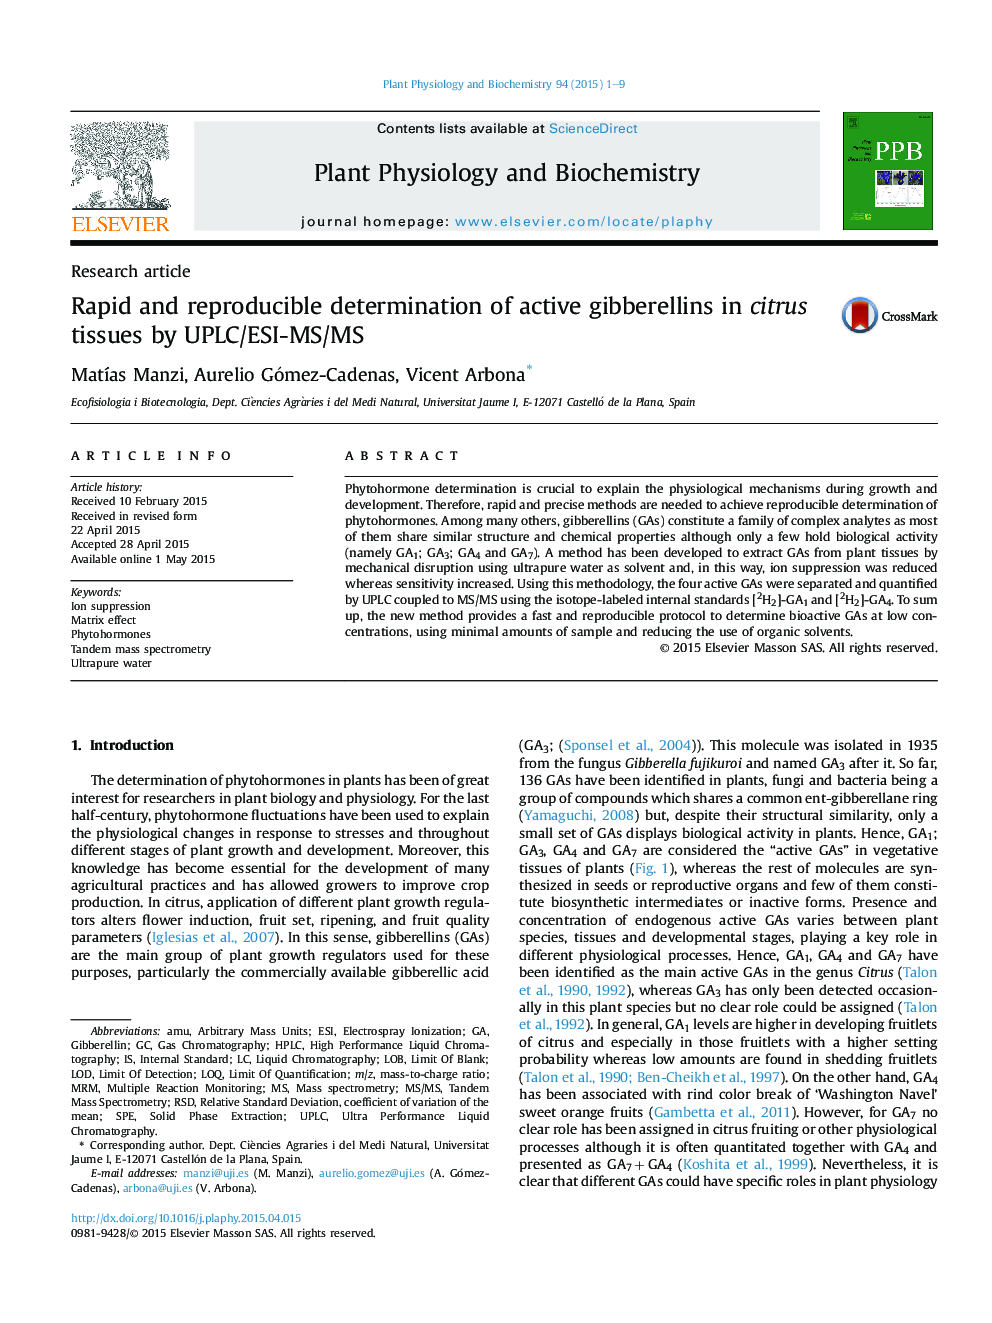 Rapid and reproducible determination of active gibberellins in citrus tissues by UPLC/ESI-MS/MS